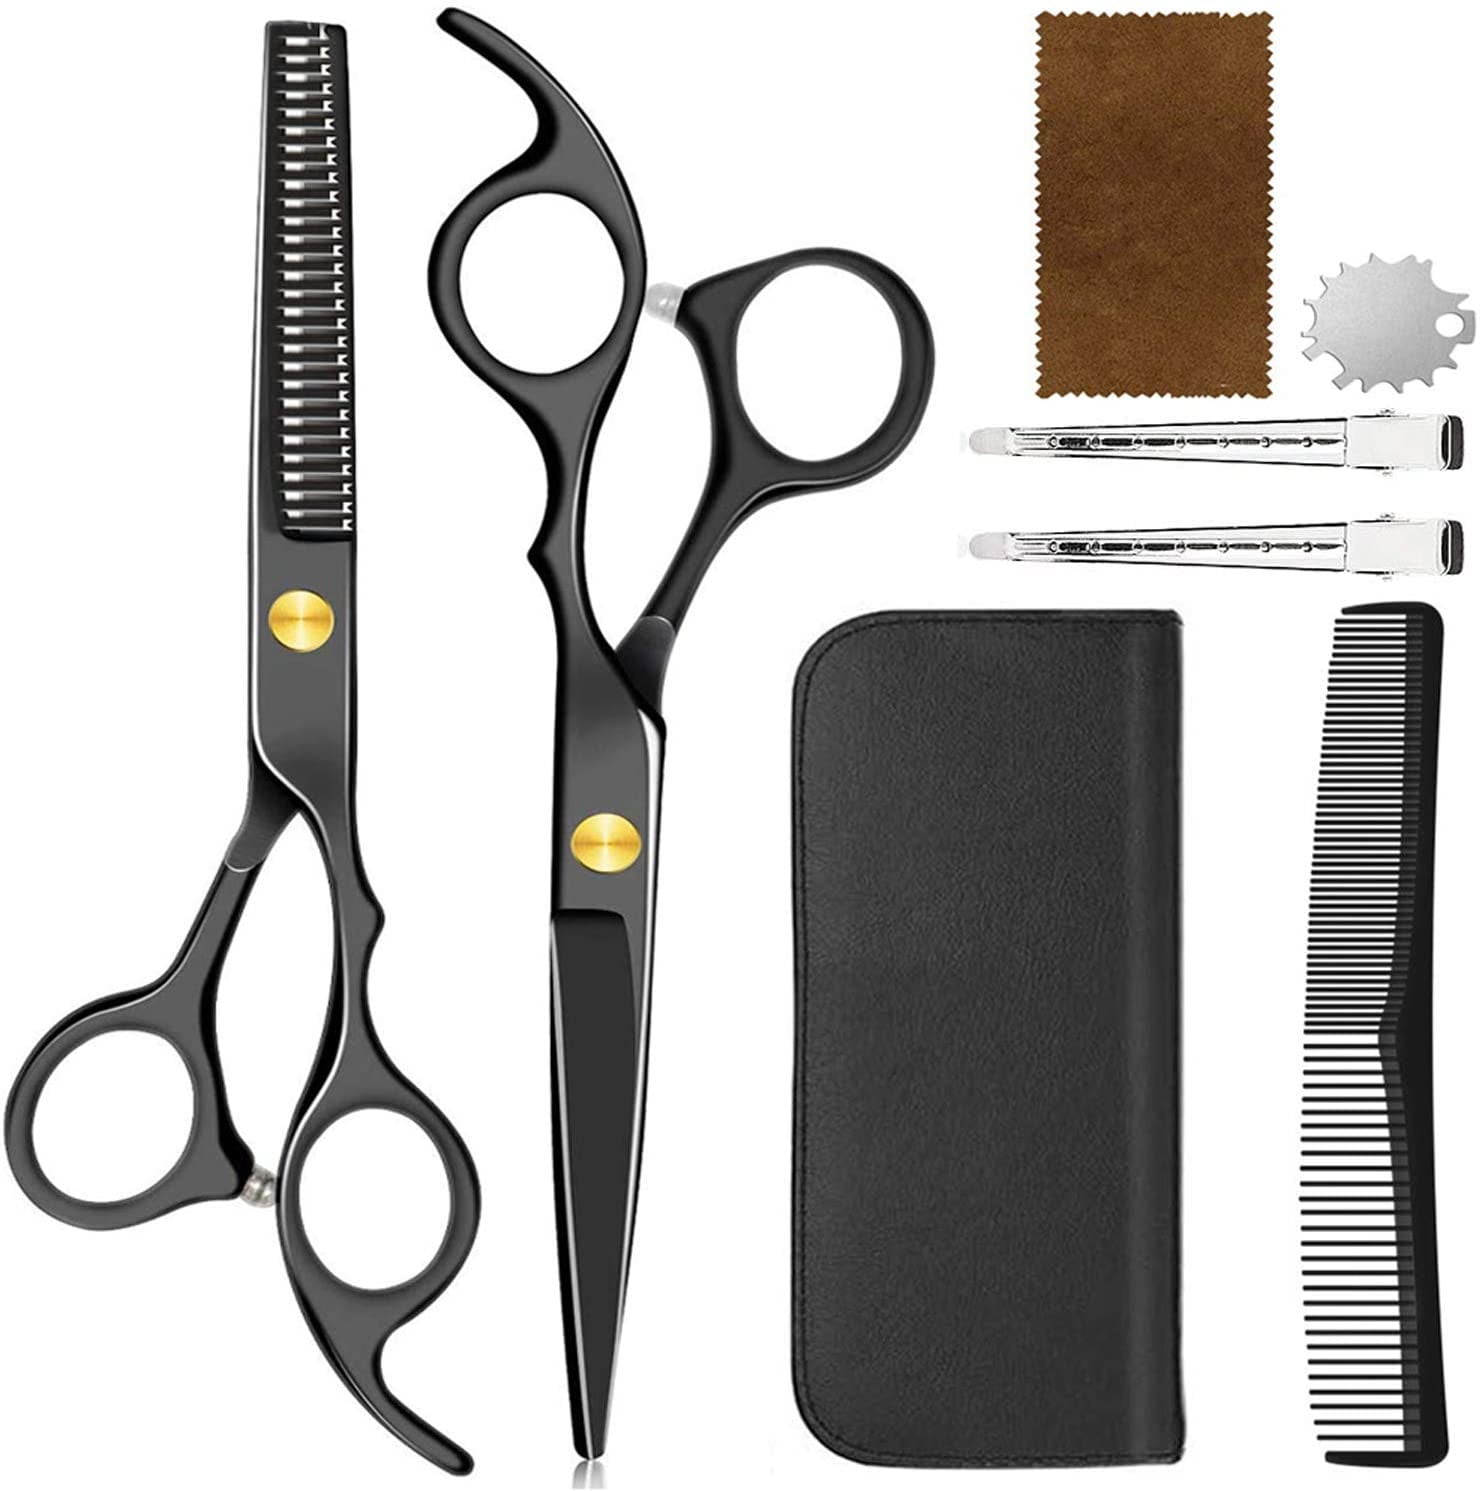 Professional Hair Cutting Scissors Set,AWECOT Hair Scissors,Sharp Razor  Edge,Hairdressing Scissors,Thinning Shears,Stainless Steel   inch,suitable for Barber, Home, Salon 